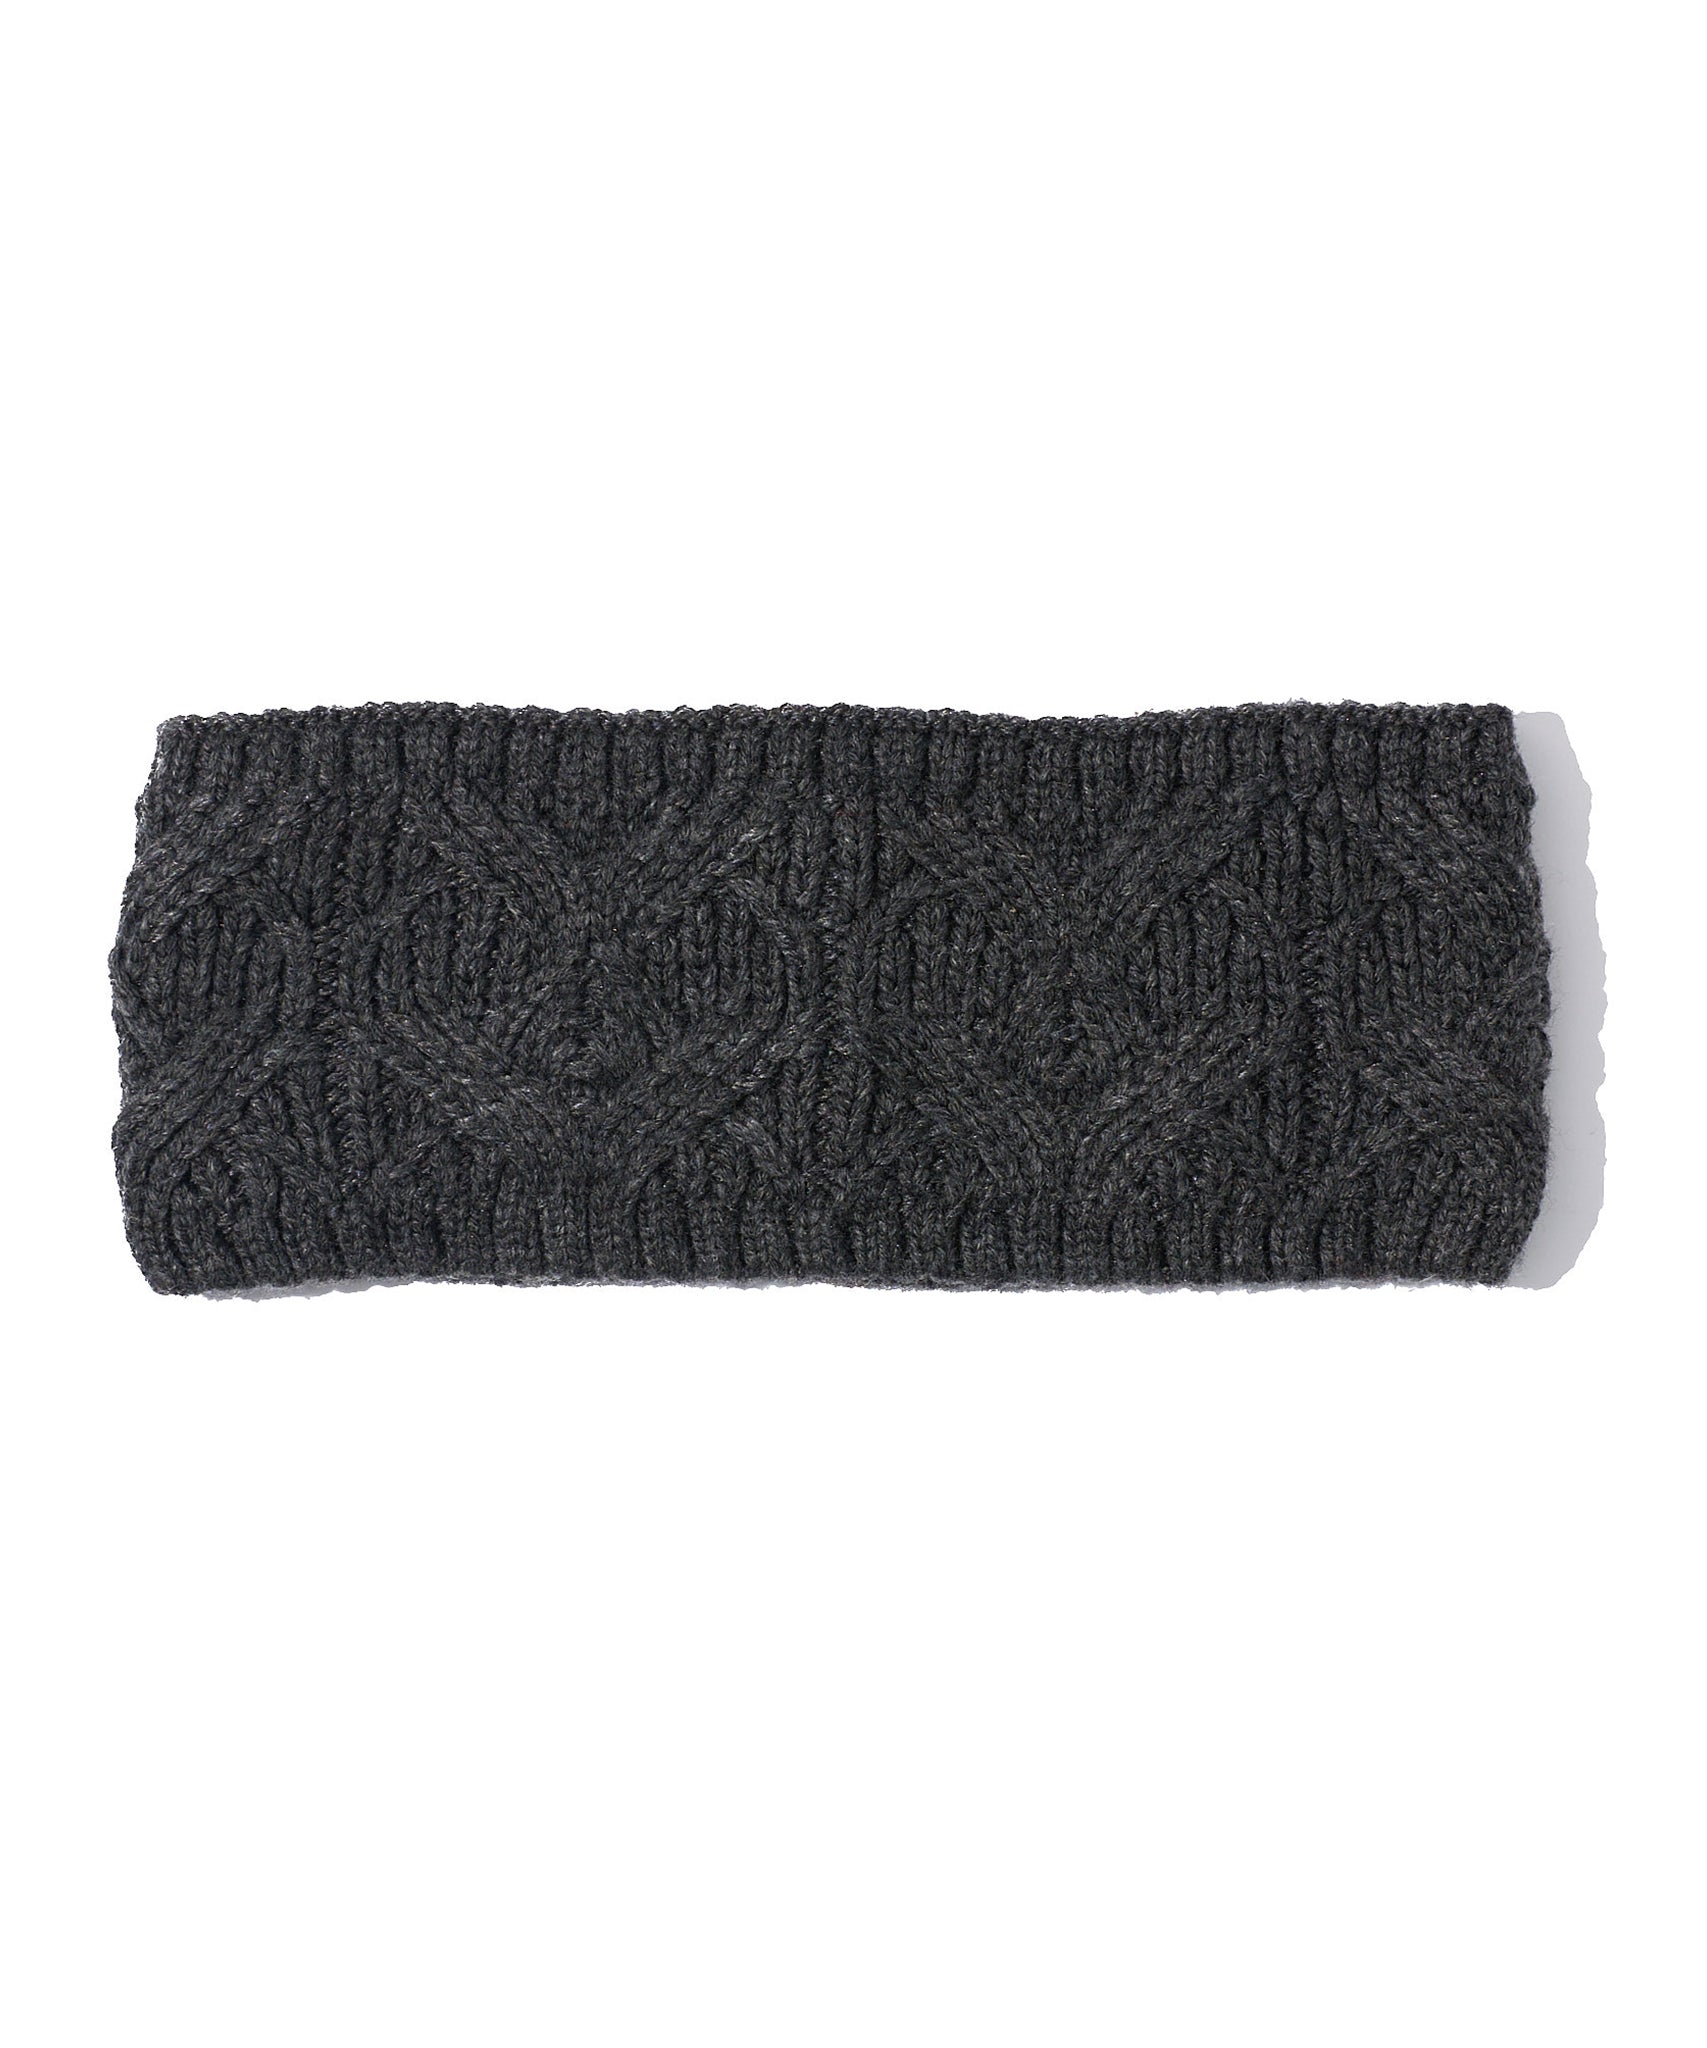 Loopy Cable Headband in color Charcoal